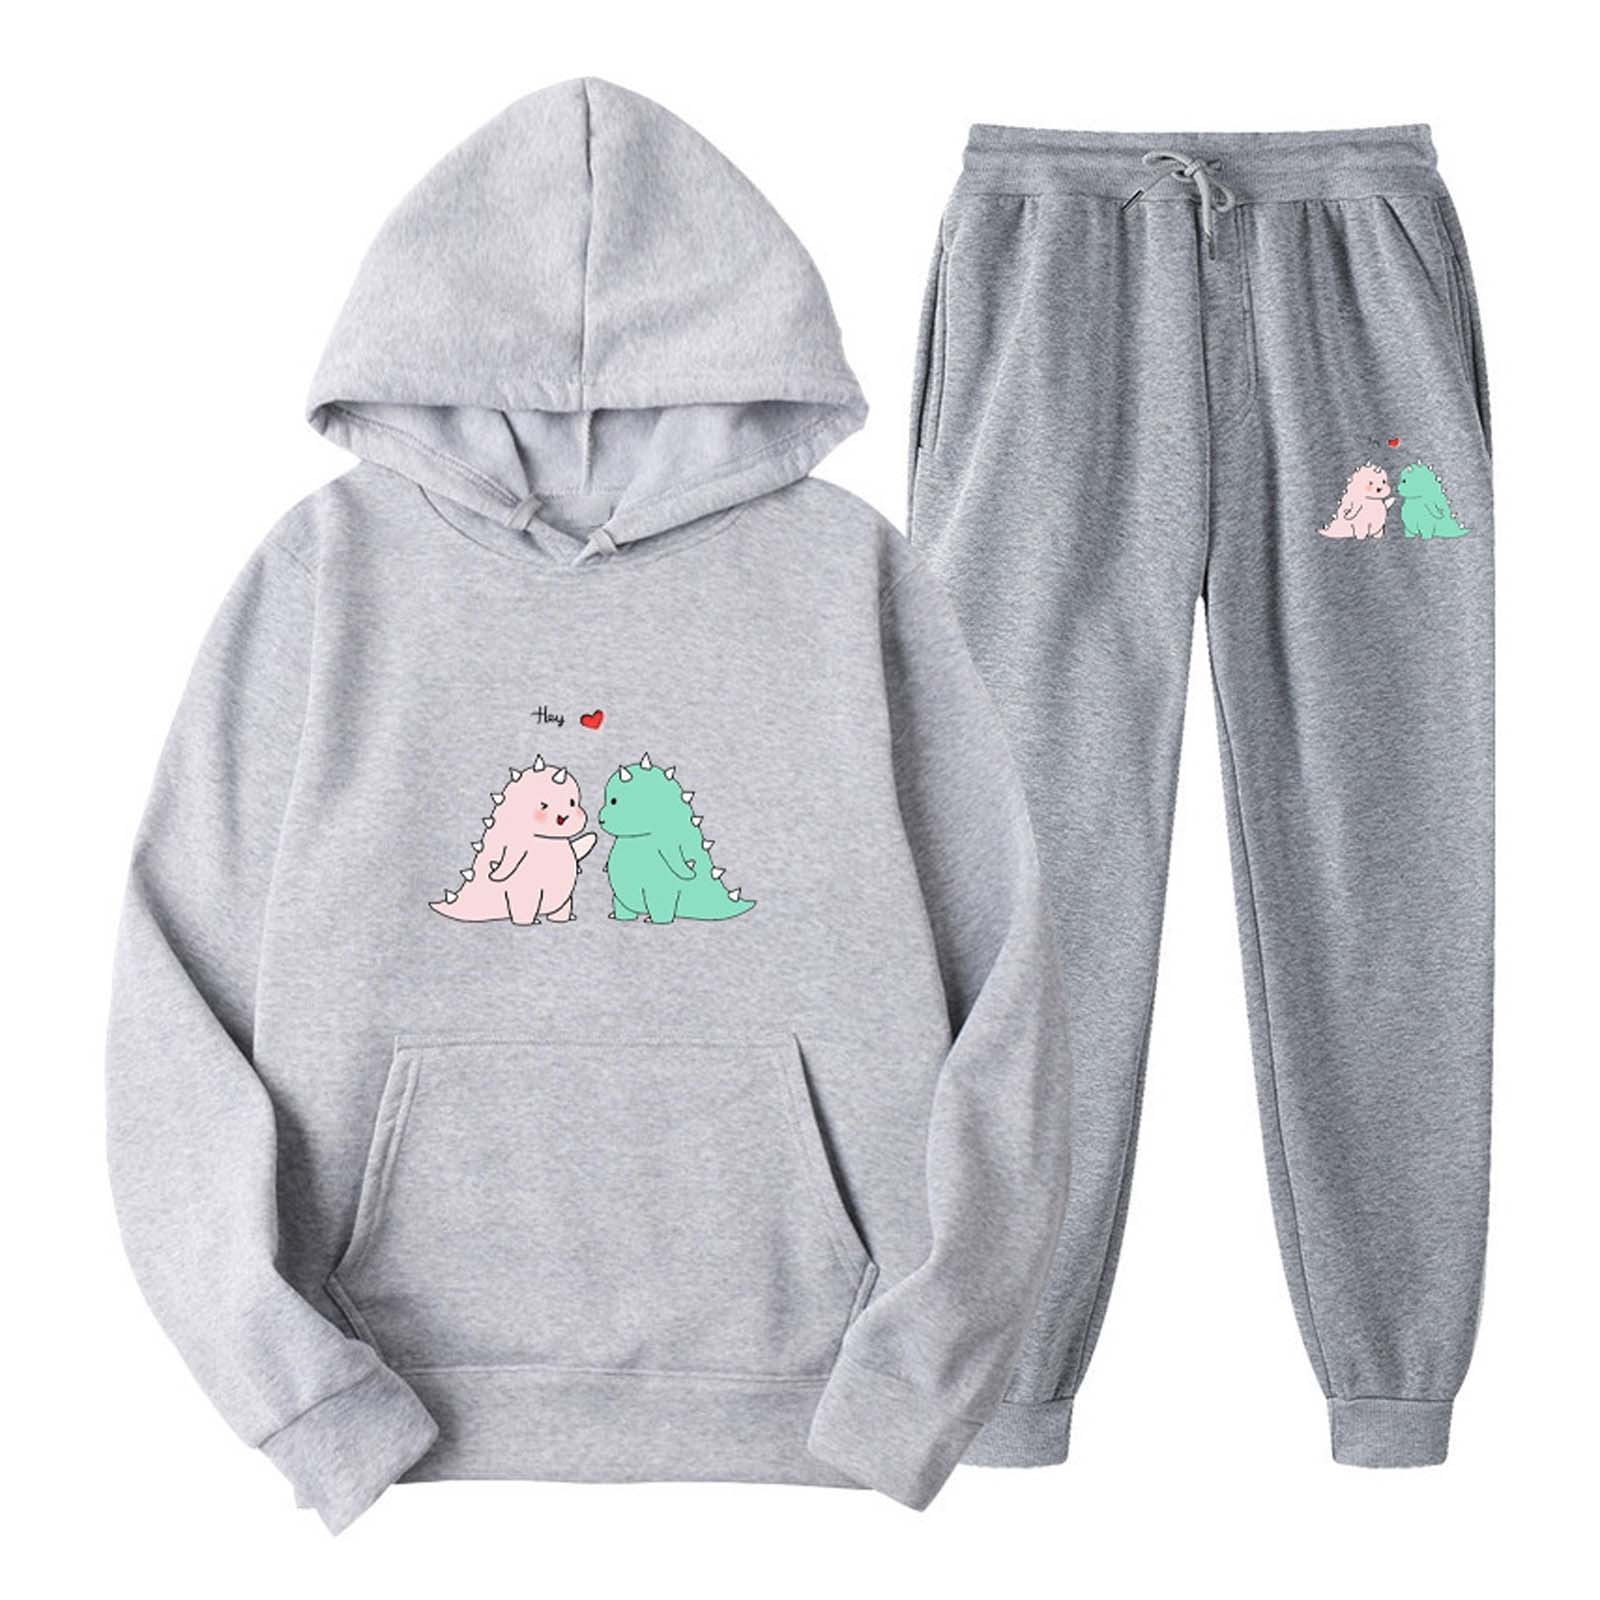 RQYYD Reduced Cute Dinosaur Graphic Hoodies and Sweatpants Set Men Women  Teen Girls Casual Sport Outfits Drawstring Jogger Tracksuits Top Gray 3XL 